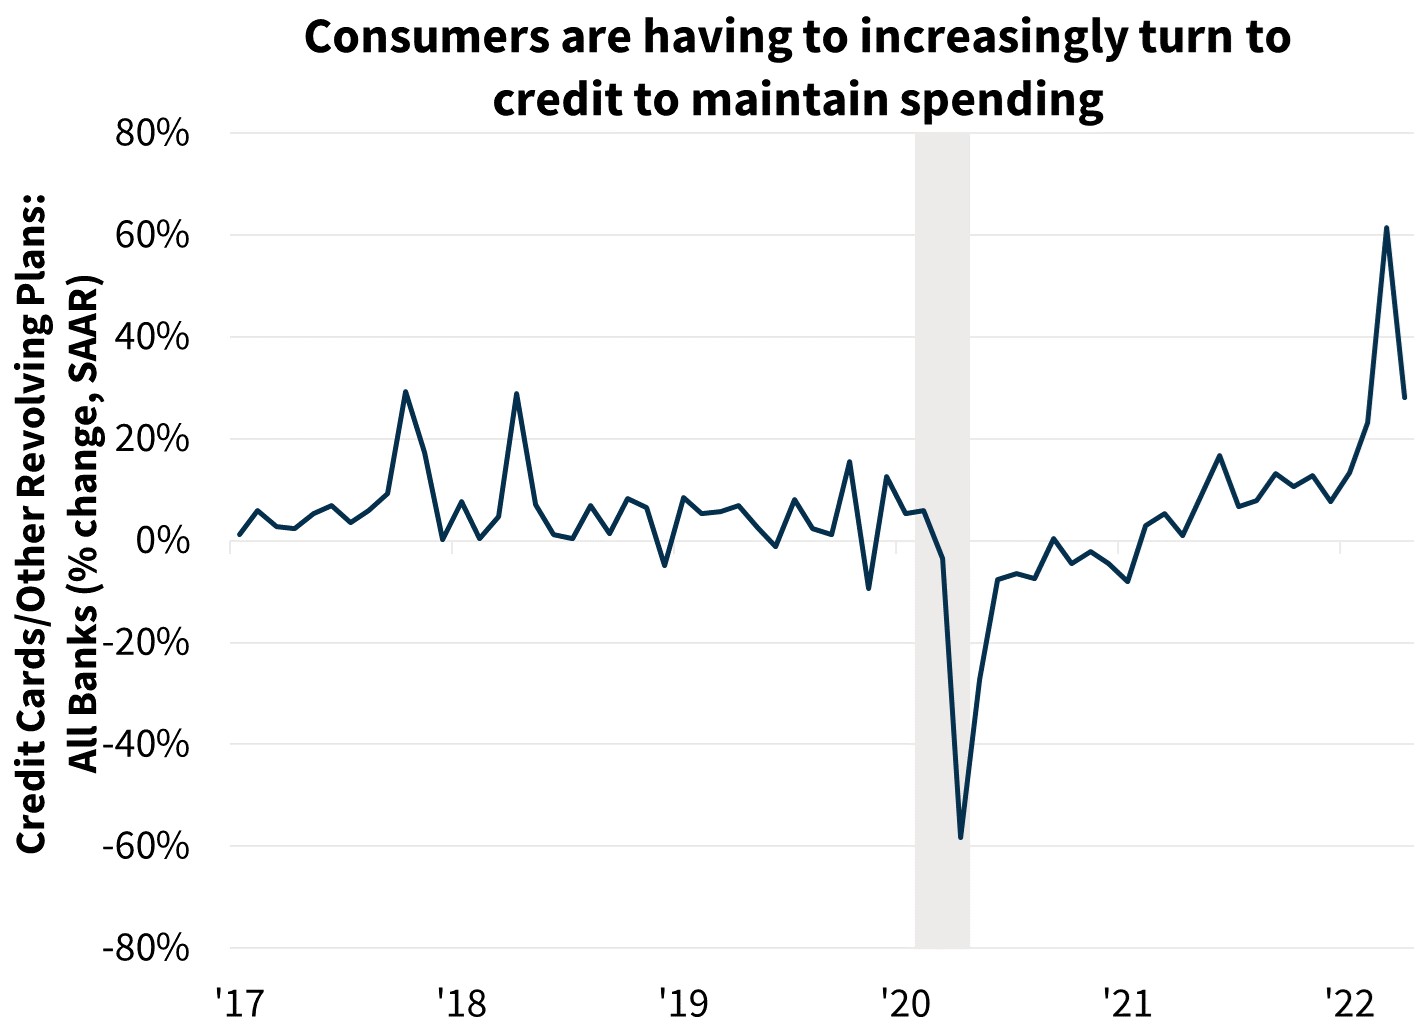  Consumers are having to increasingly turn to credit to maintain spending  